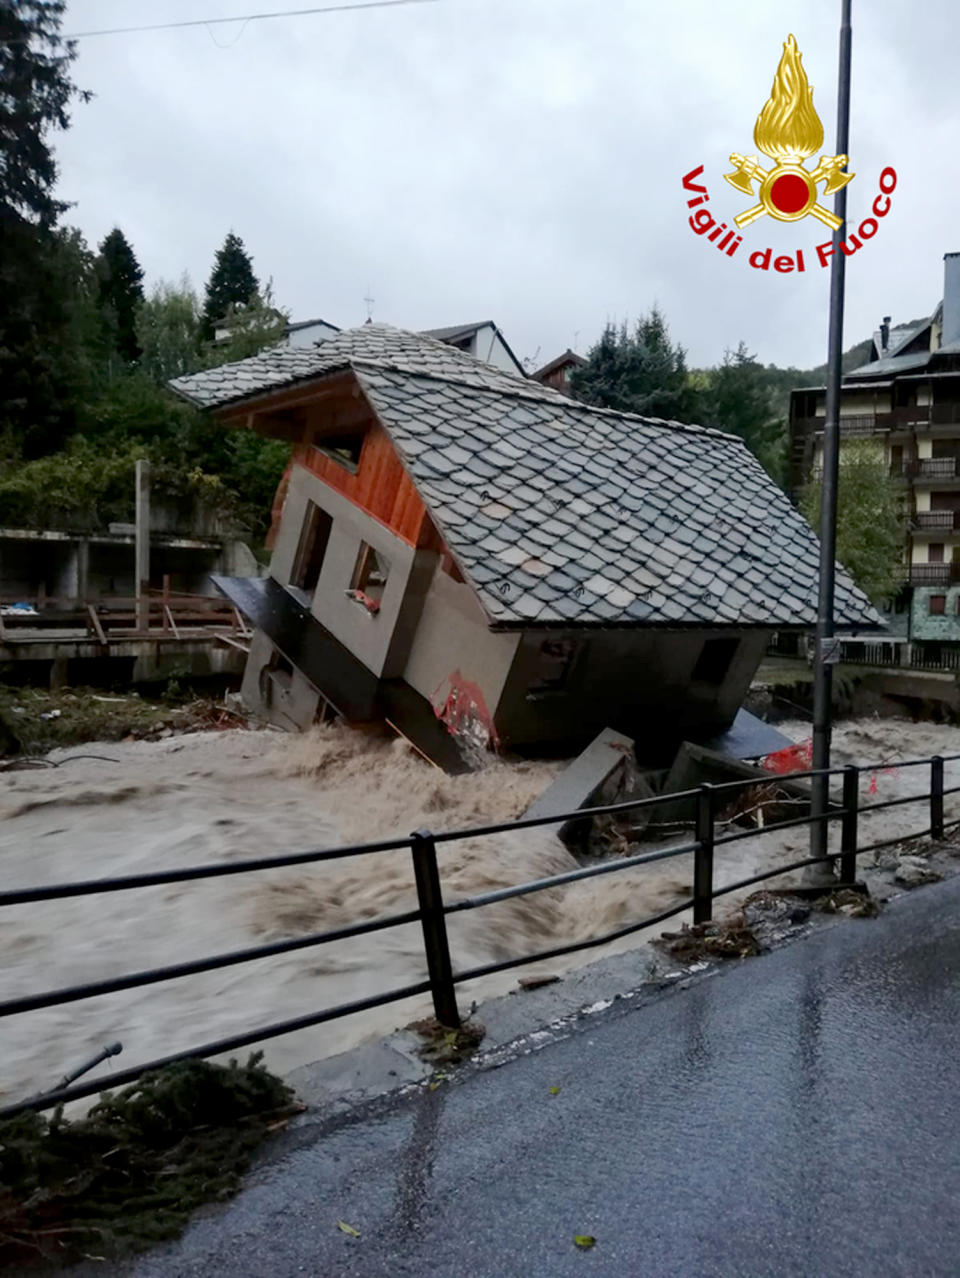 A building is toppled over by the Cervo river in spate due to heavy rains in Biella, northern Italy, Saturday, Oct. 3, 2020. (Firefighter Vigili del Fuoco via AP)